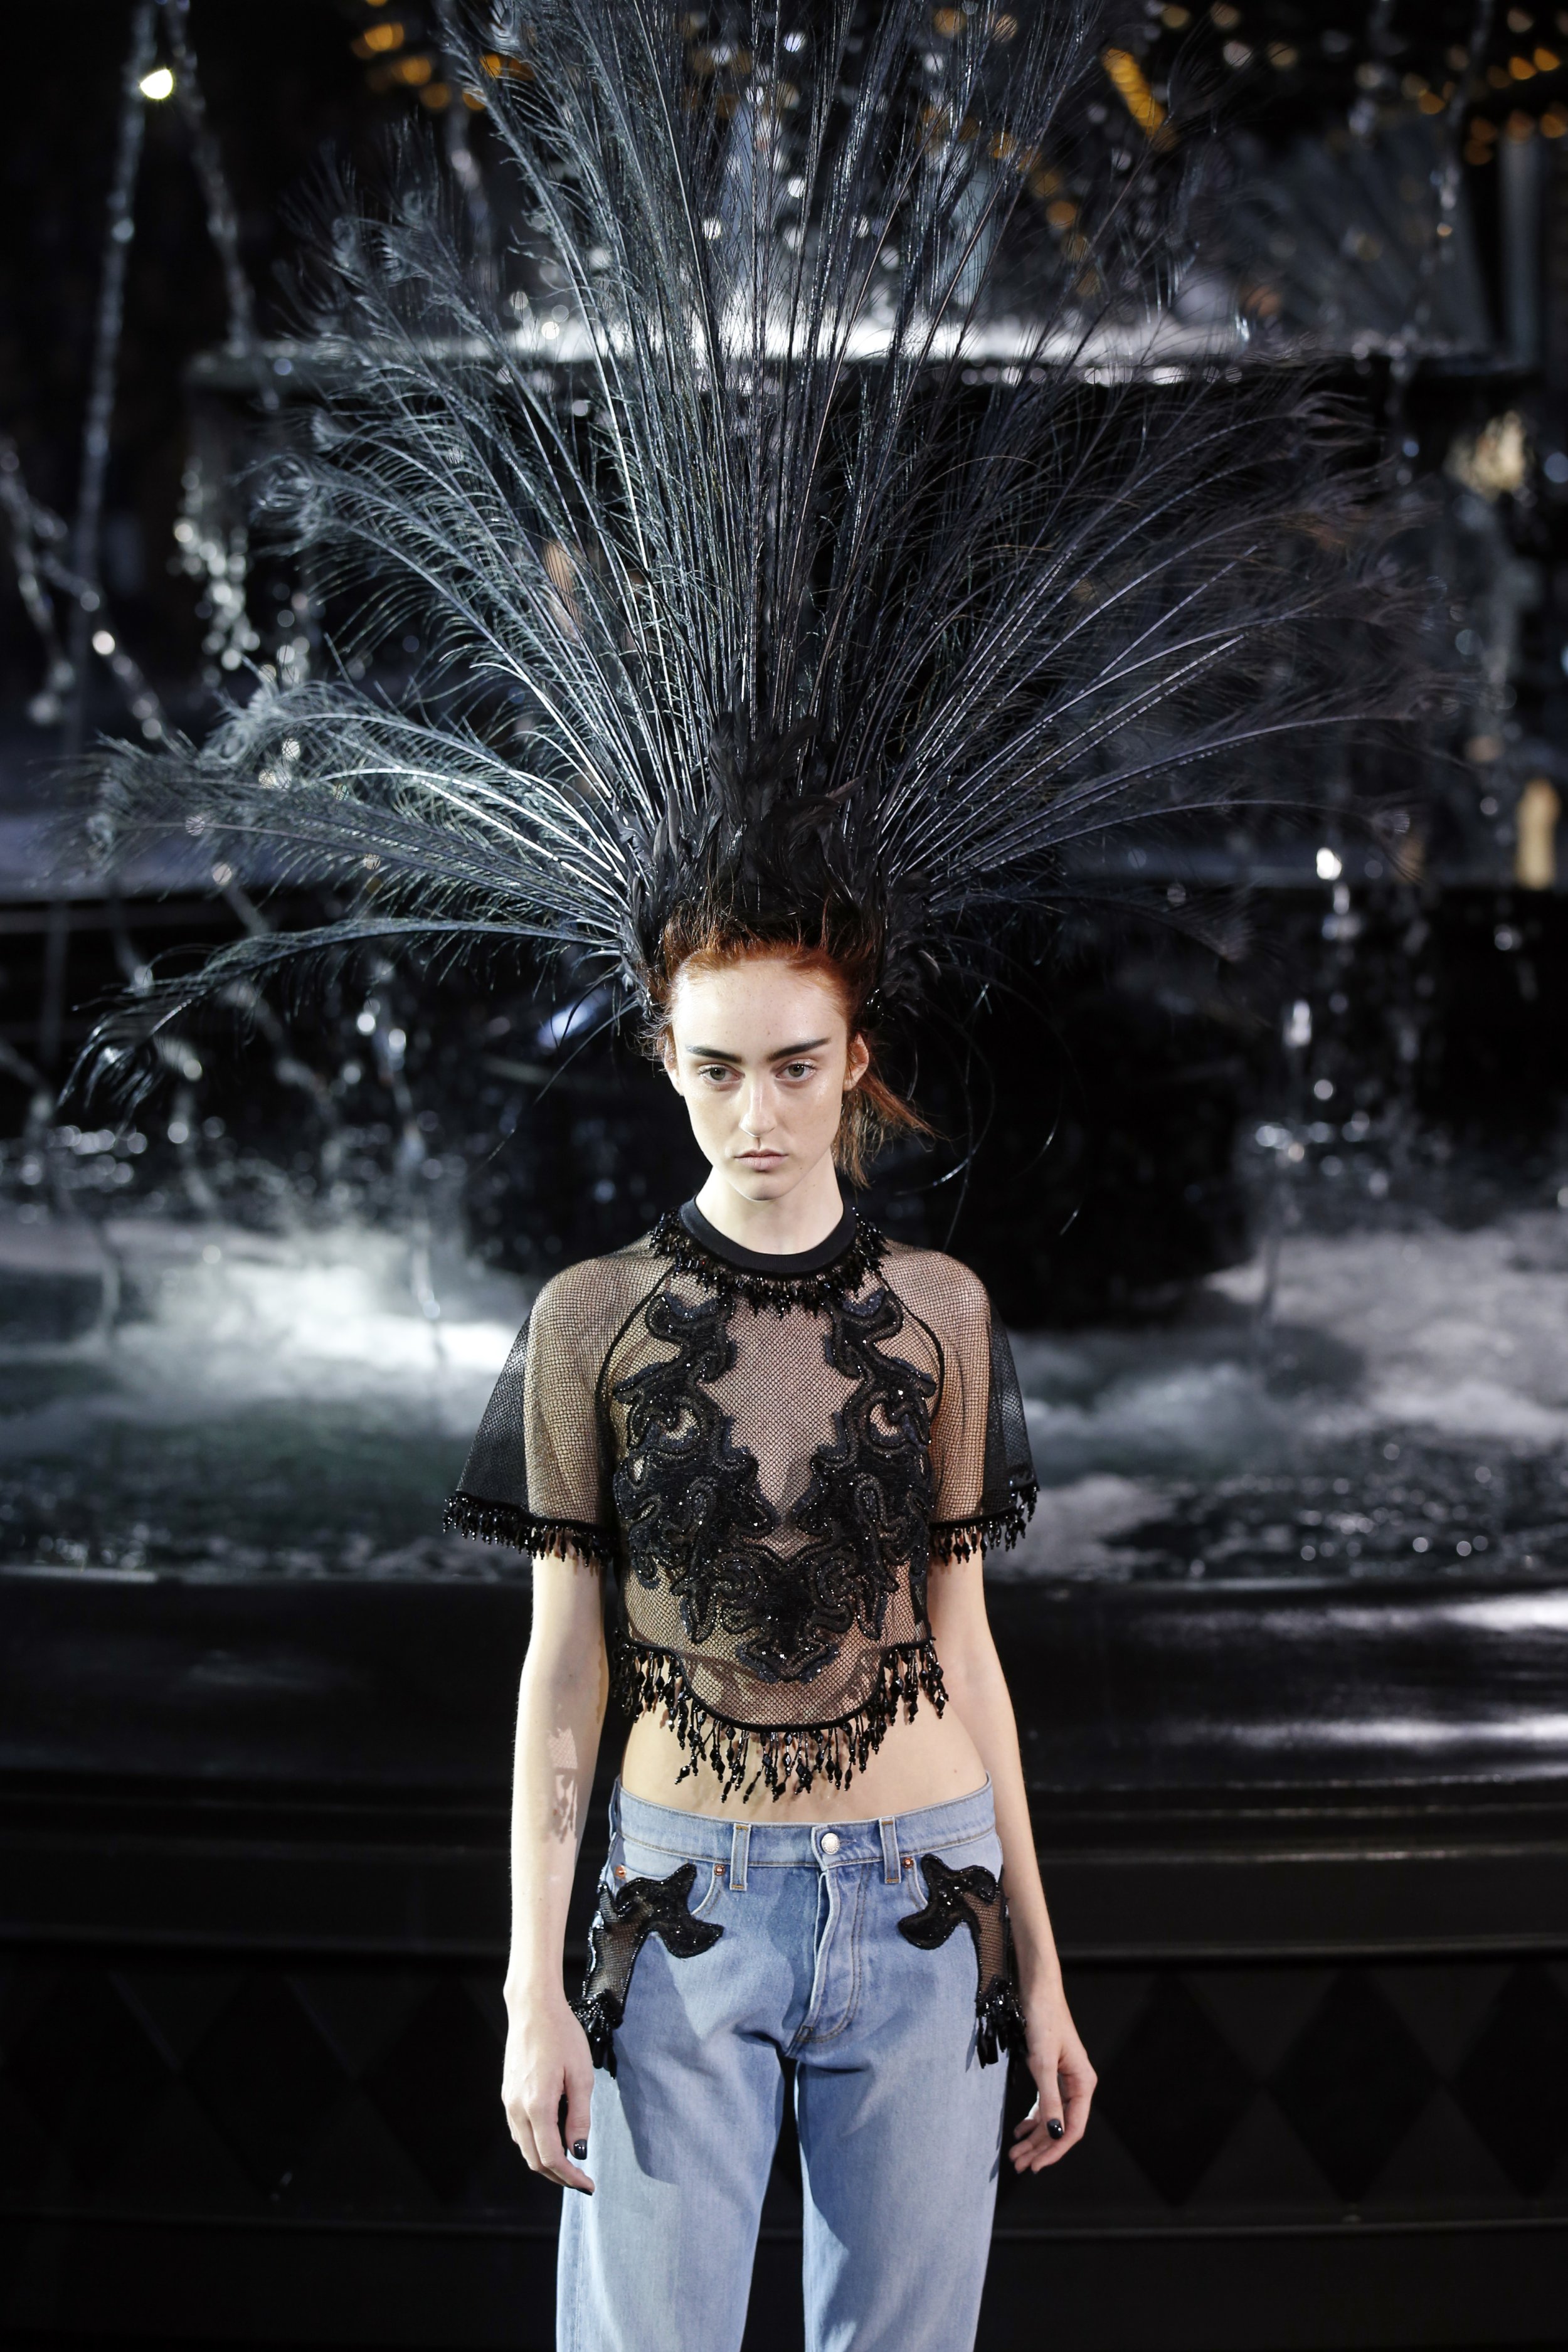 Marc Jacobs final collection for Louis Vuitton Spring 2014